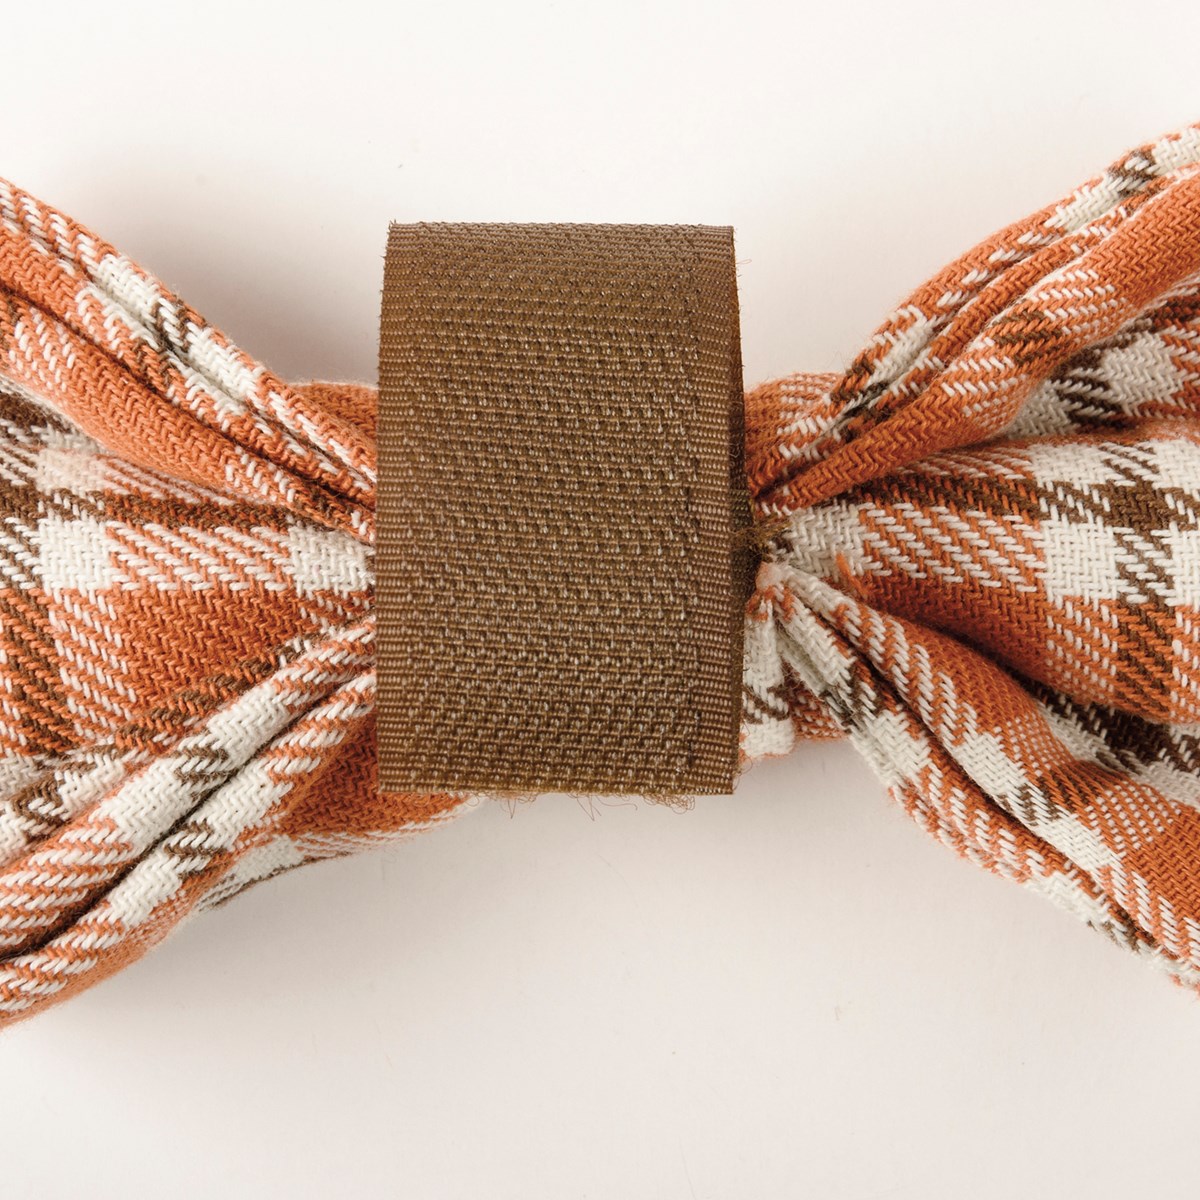 Pet Bow Tie Set Lg - Fall Plaid - 5.50" x 3.50" x 2" - Cotton, Hook-and-Loop Fastener